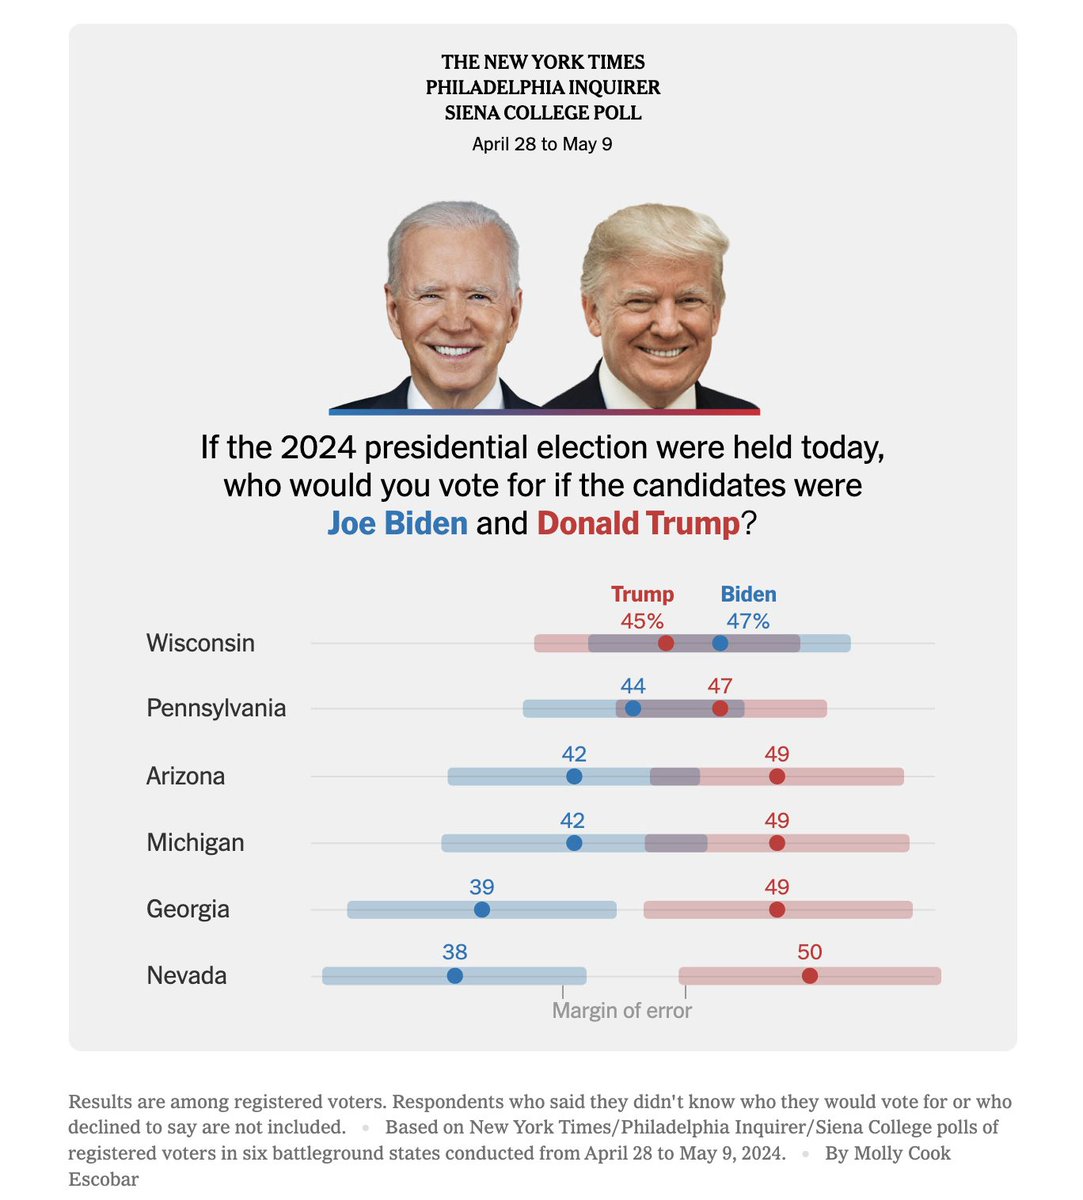 We're still nearly 6 months out, etc etc, but this is not a good poll for Biden. The country is sleepwalking into autocracy.